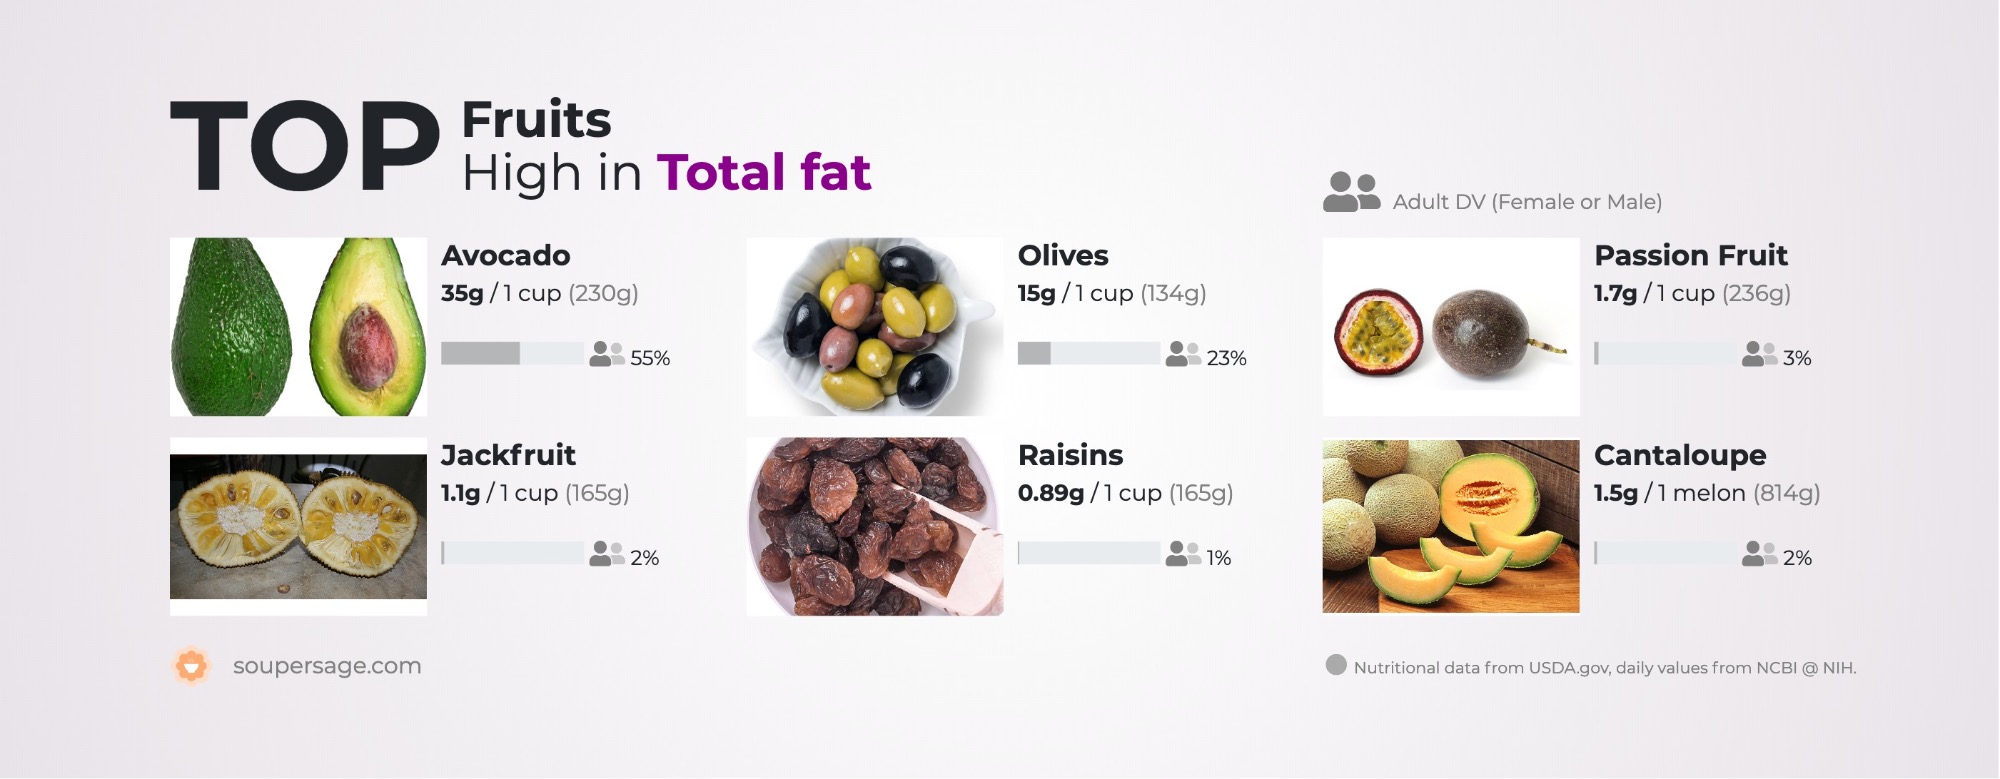 image of Top Fruits High in Total fat